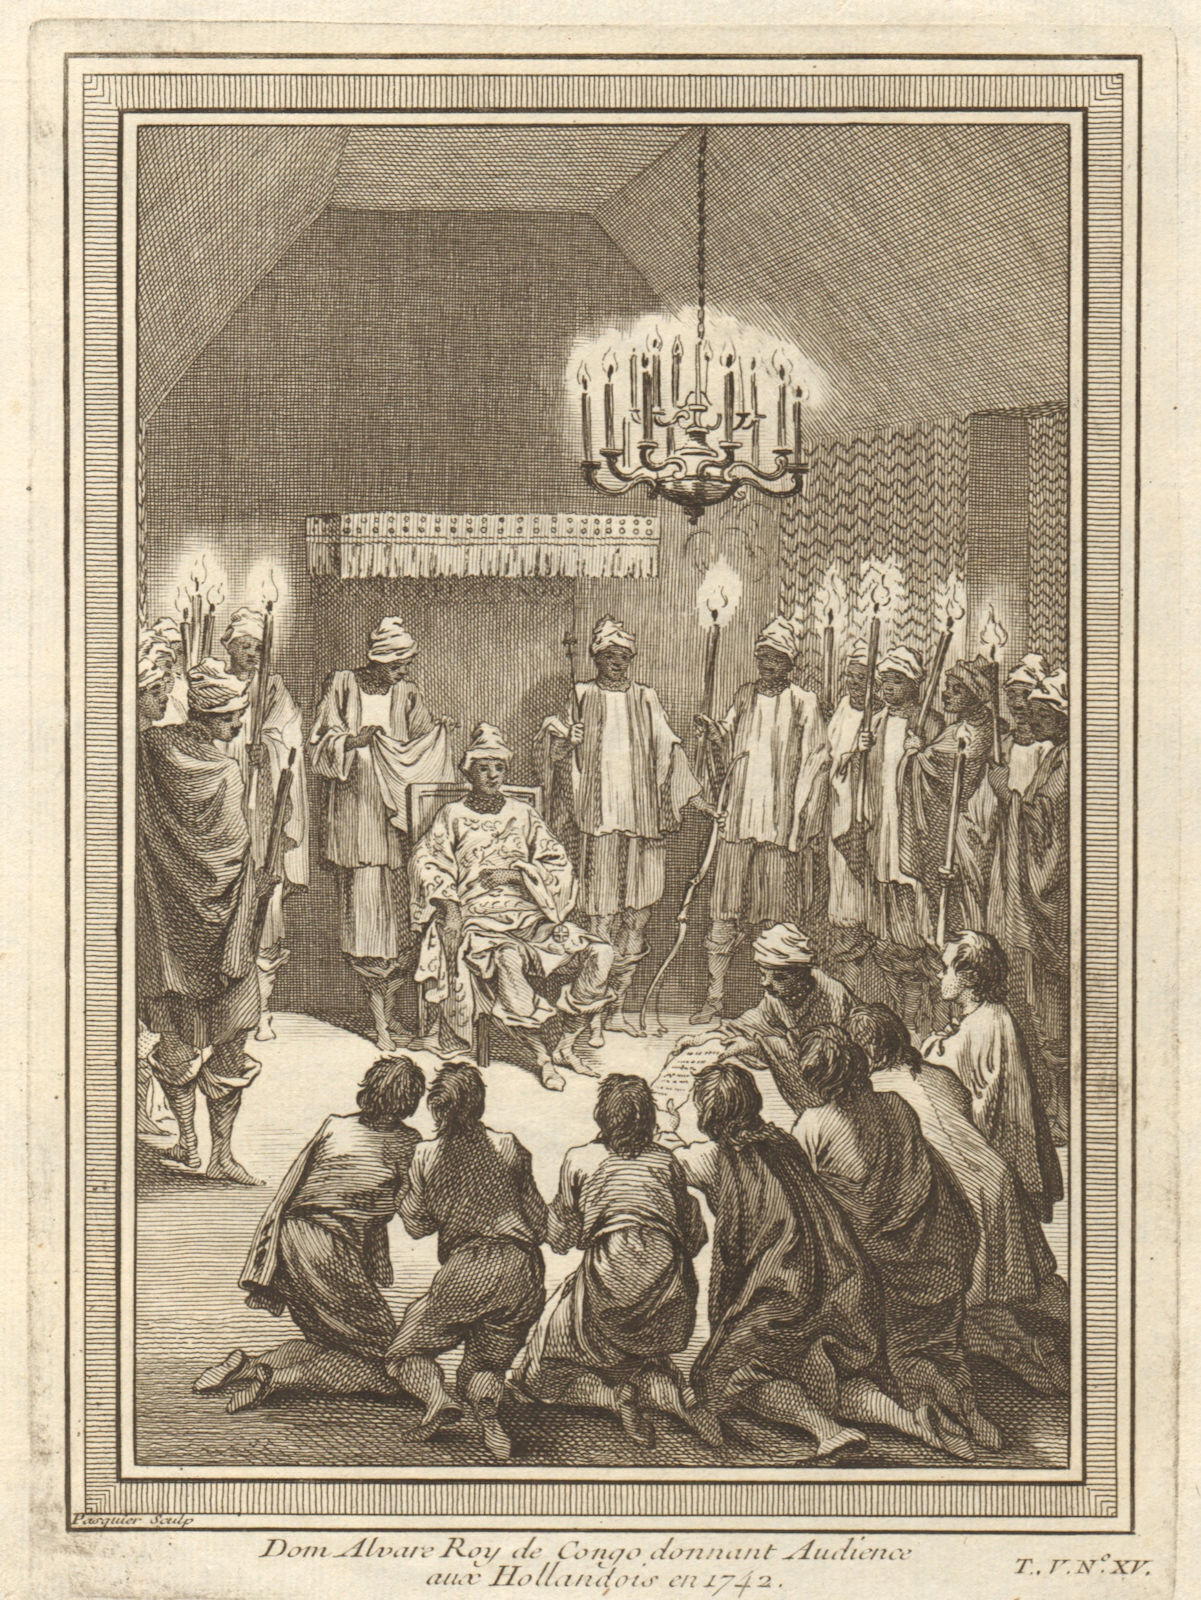 King of Kongo (probably Alvaro VI), audience with the Dutch in 1742. Congo 1748